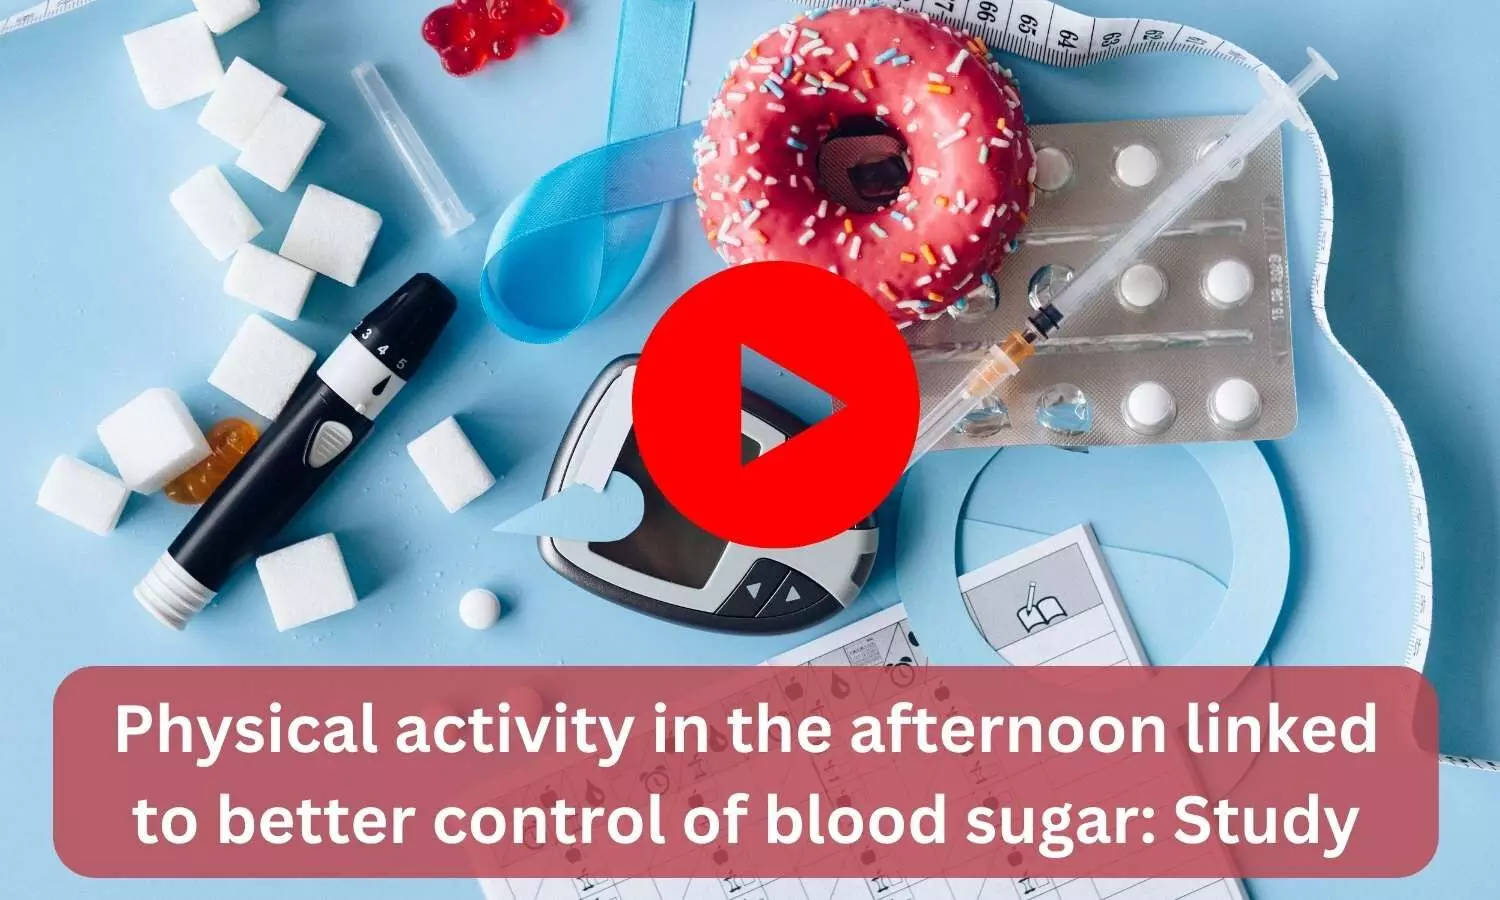 Physical activity in the afternoon linked to better control of blood sugar: Study